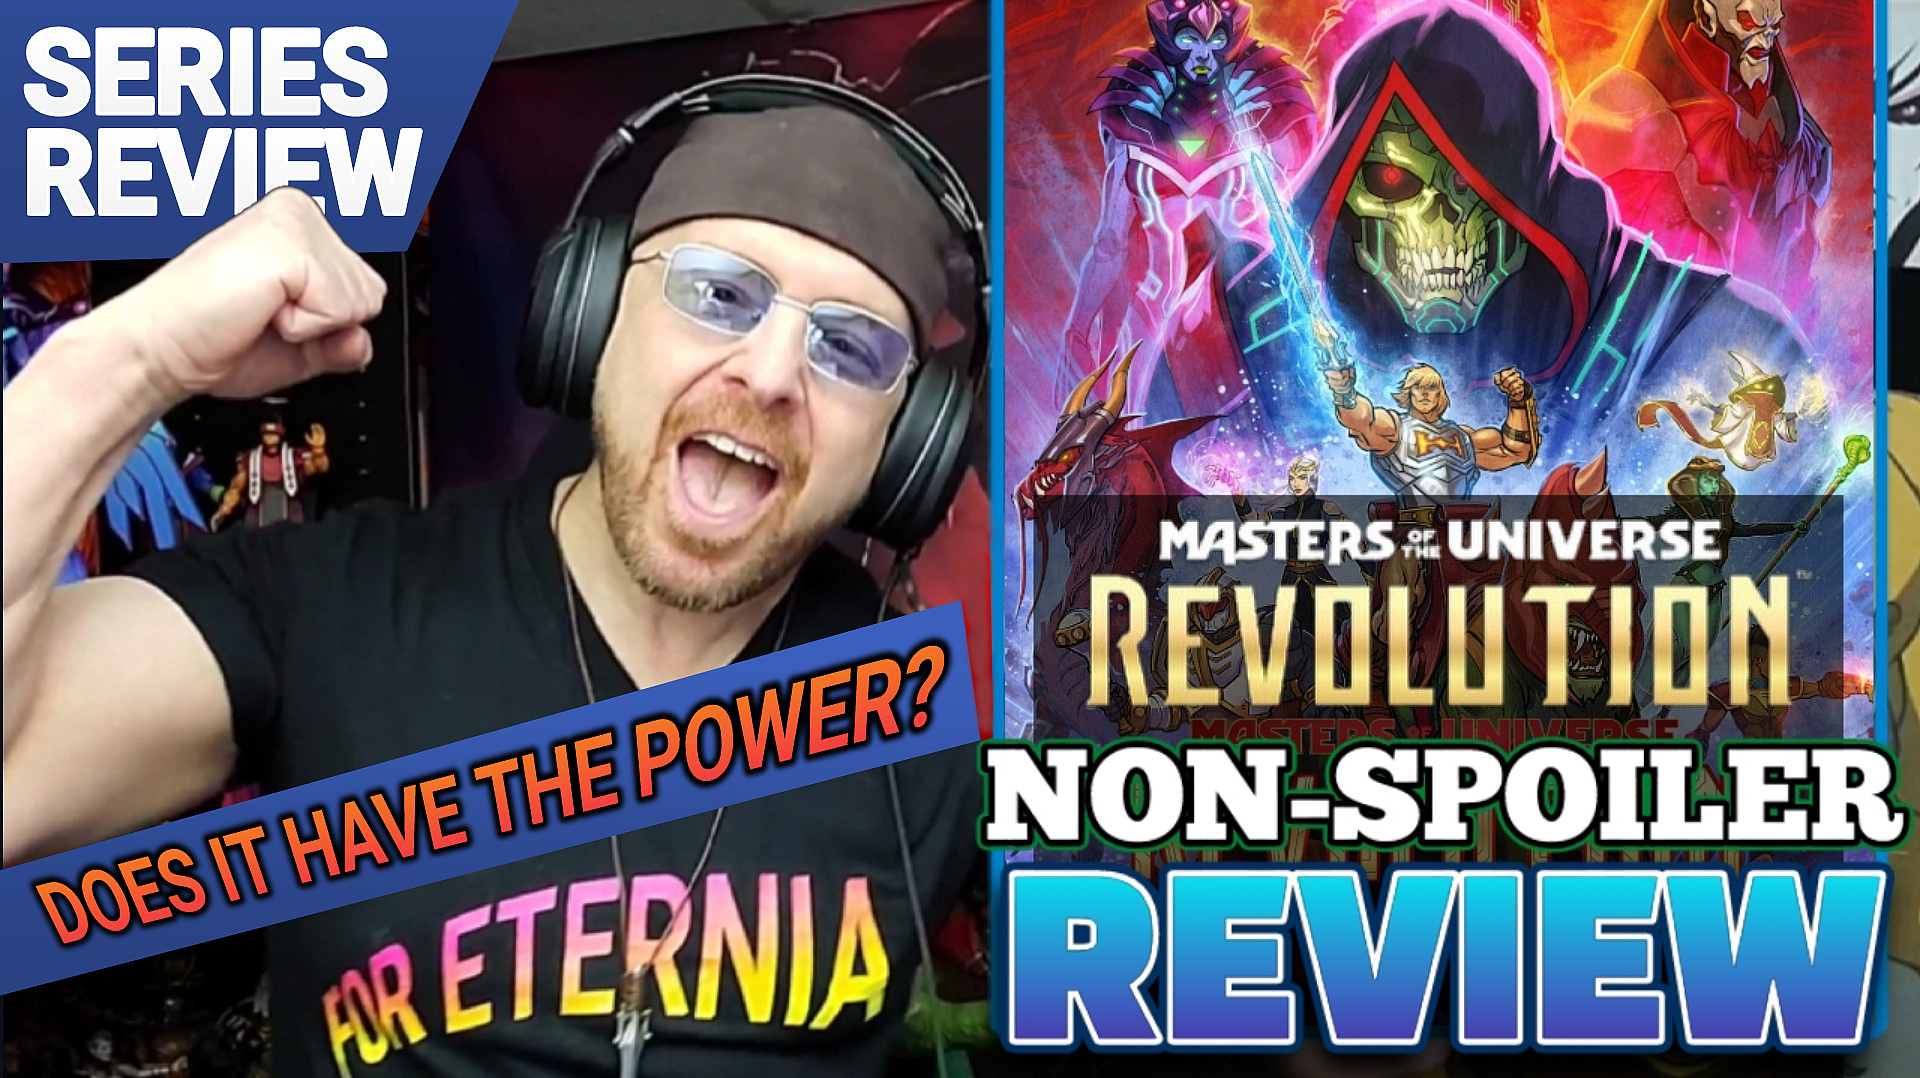 SERIES REVIEW: Watch our Non-Spoiler Review of the ”Masters of the Universe: Revolution” (2024) Netflix Animated Series